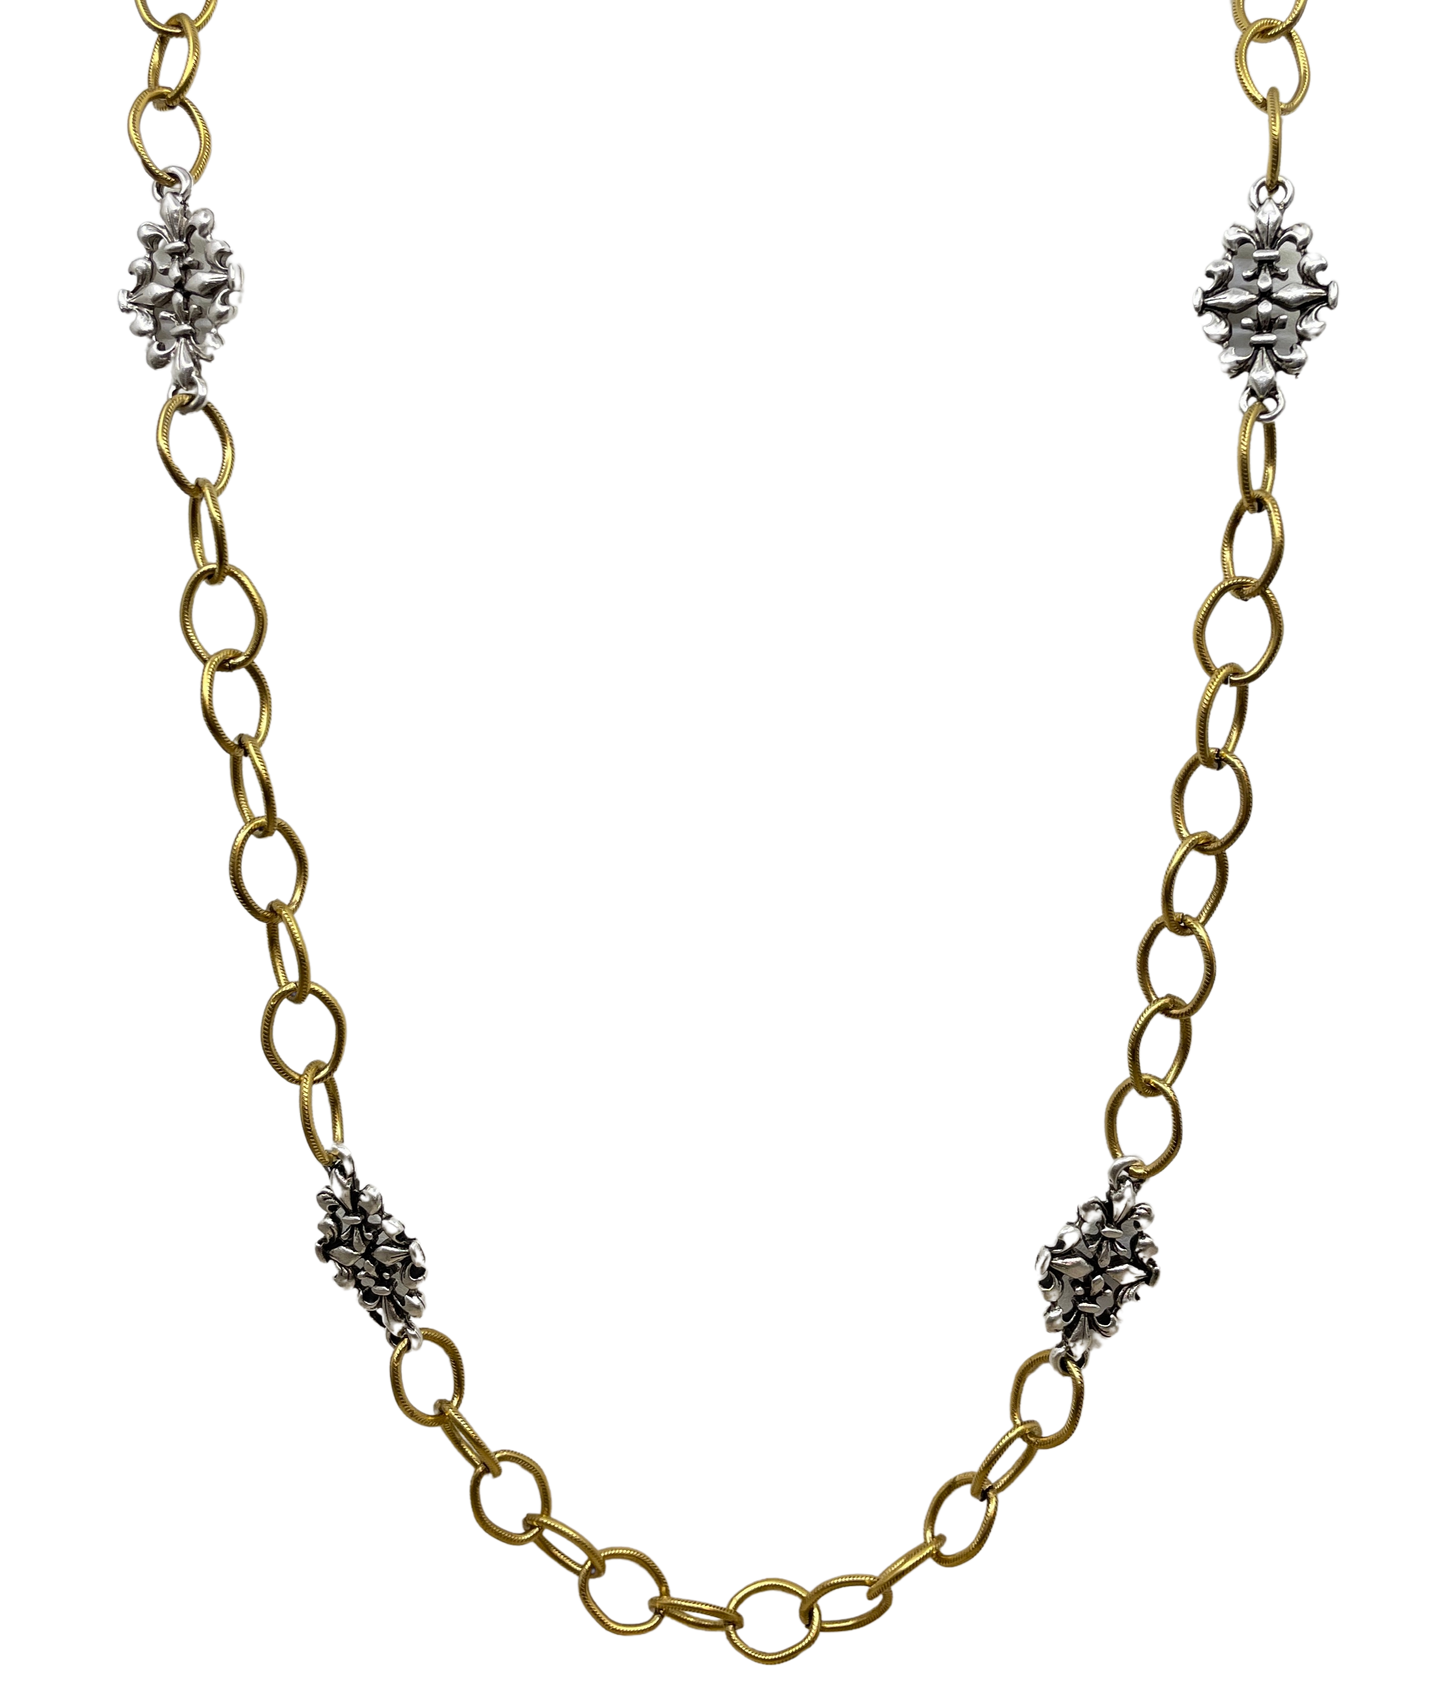 Mixed Metal Sterling & Gold Plated 36" Chain with Vintage Reproduction Fleur De Lis Accents